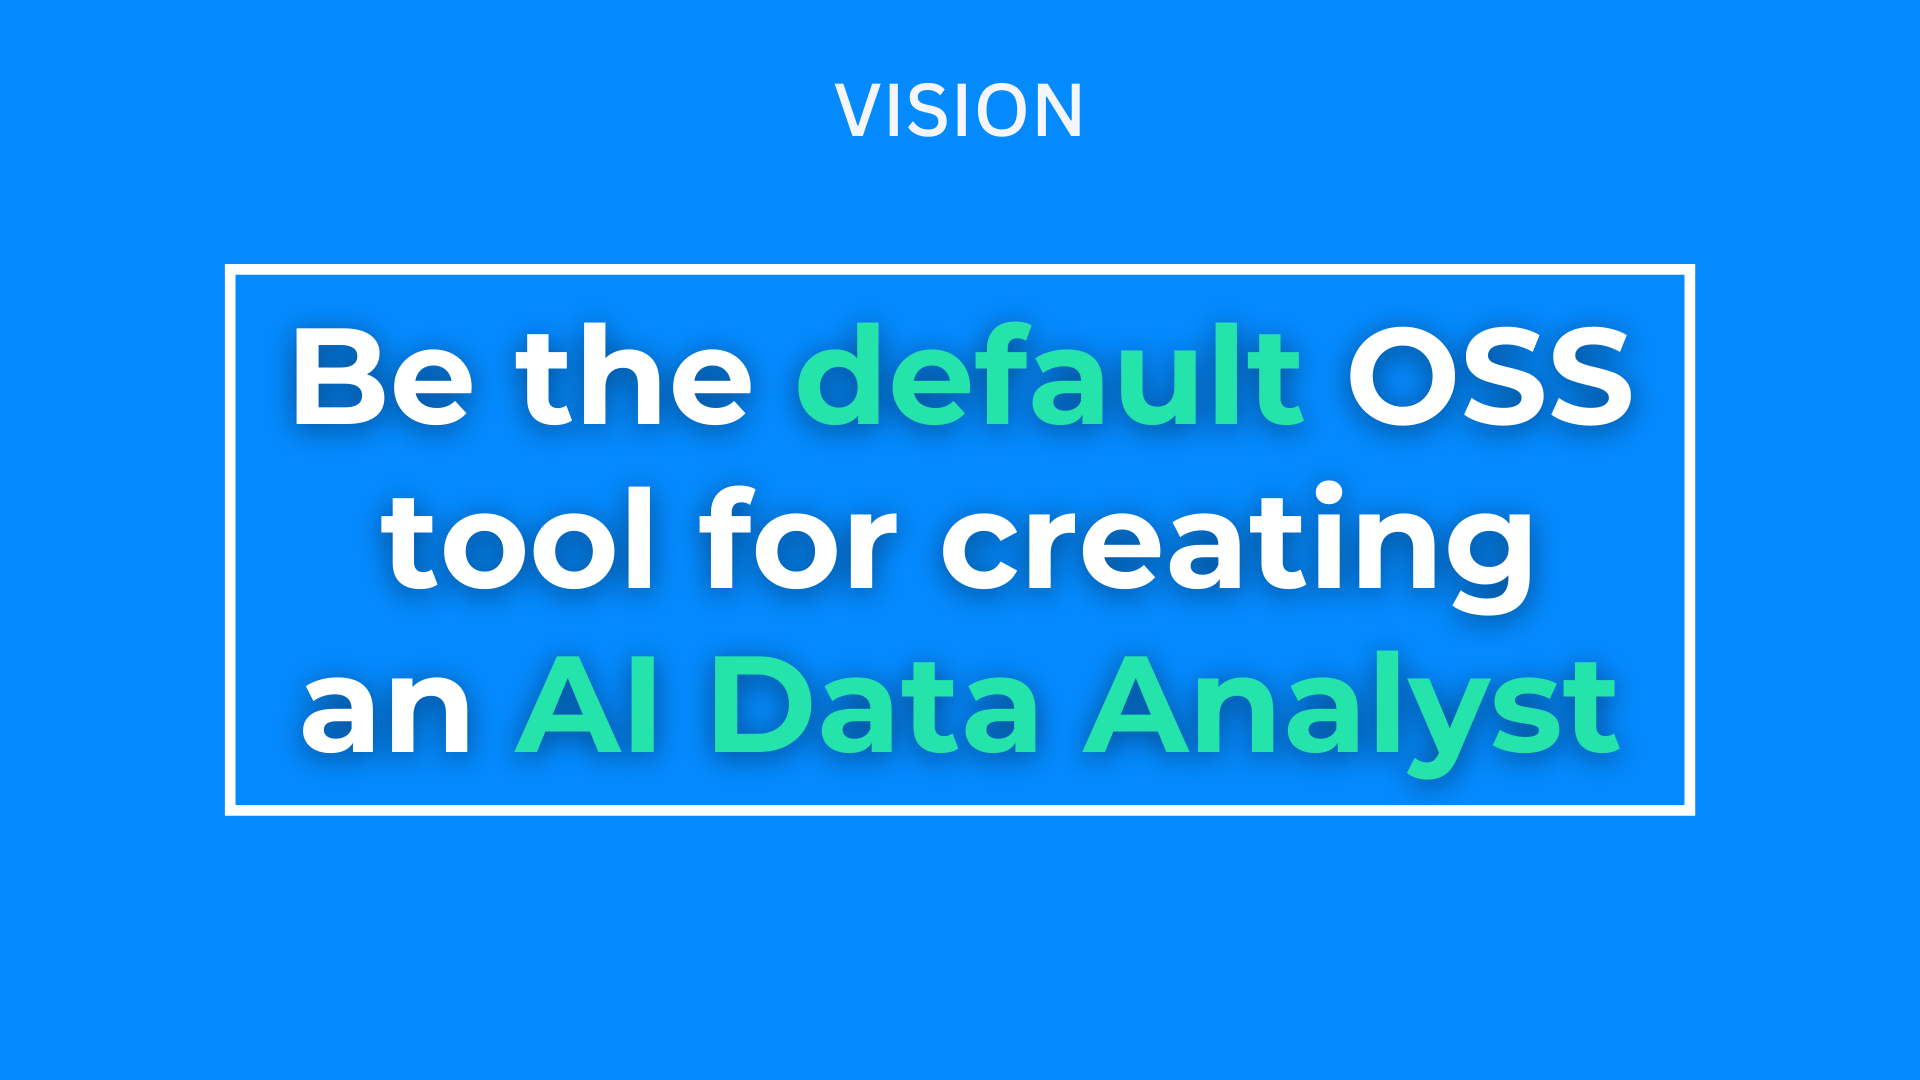 Vision: Be the default OSS tool for creating an AI Data Analyst